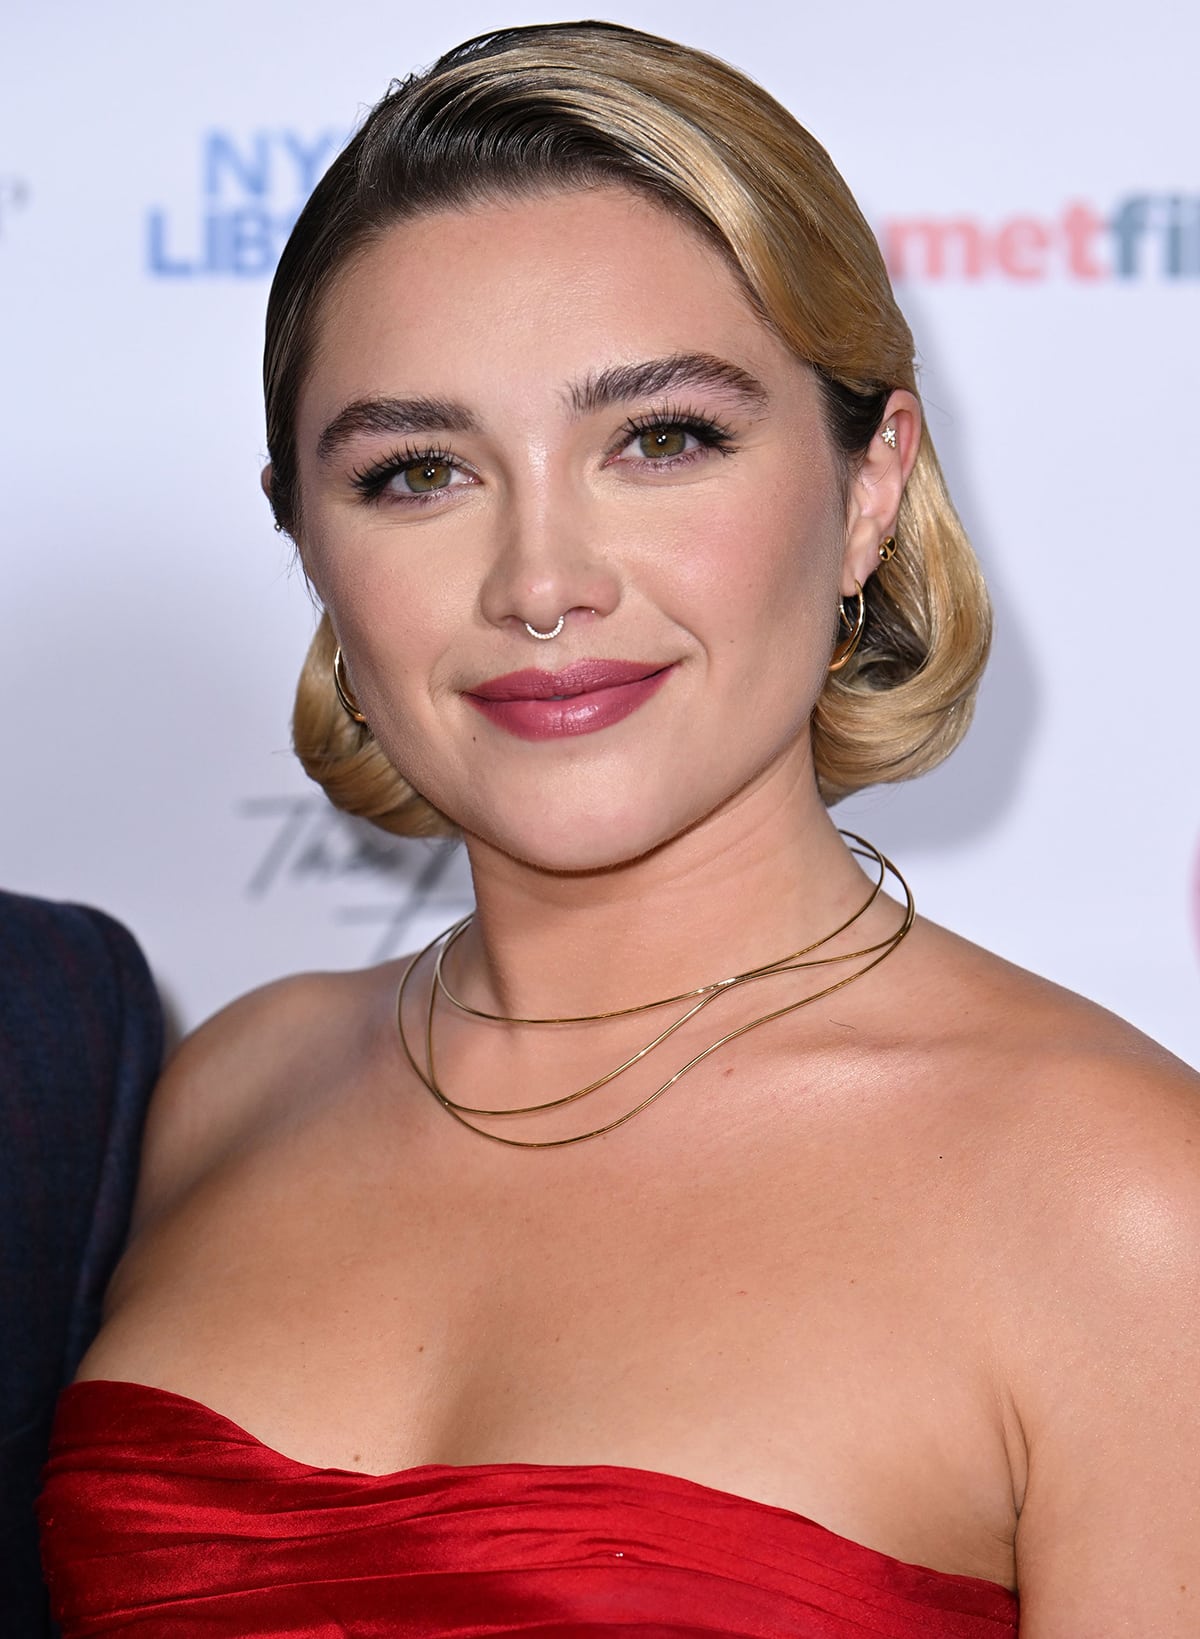 Florence Pugh completes the retro look with a side-swept short bob with tucked ends